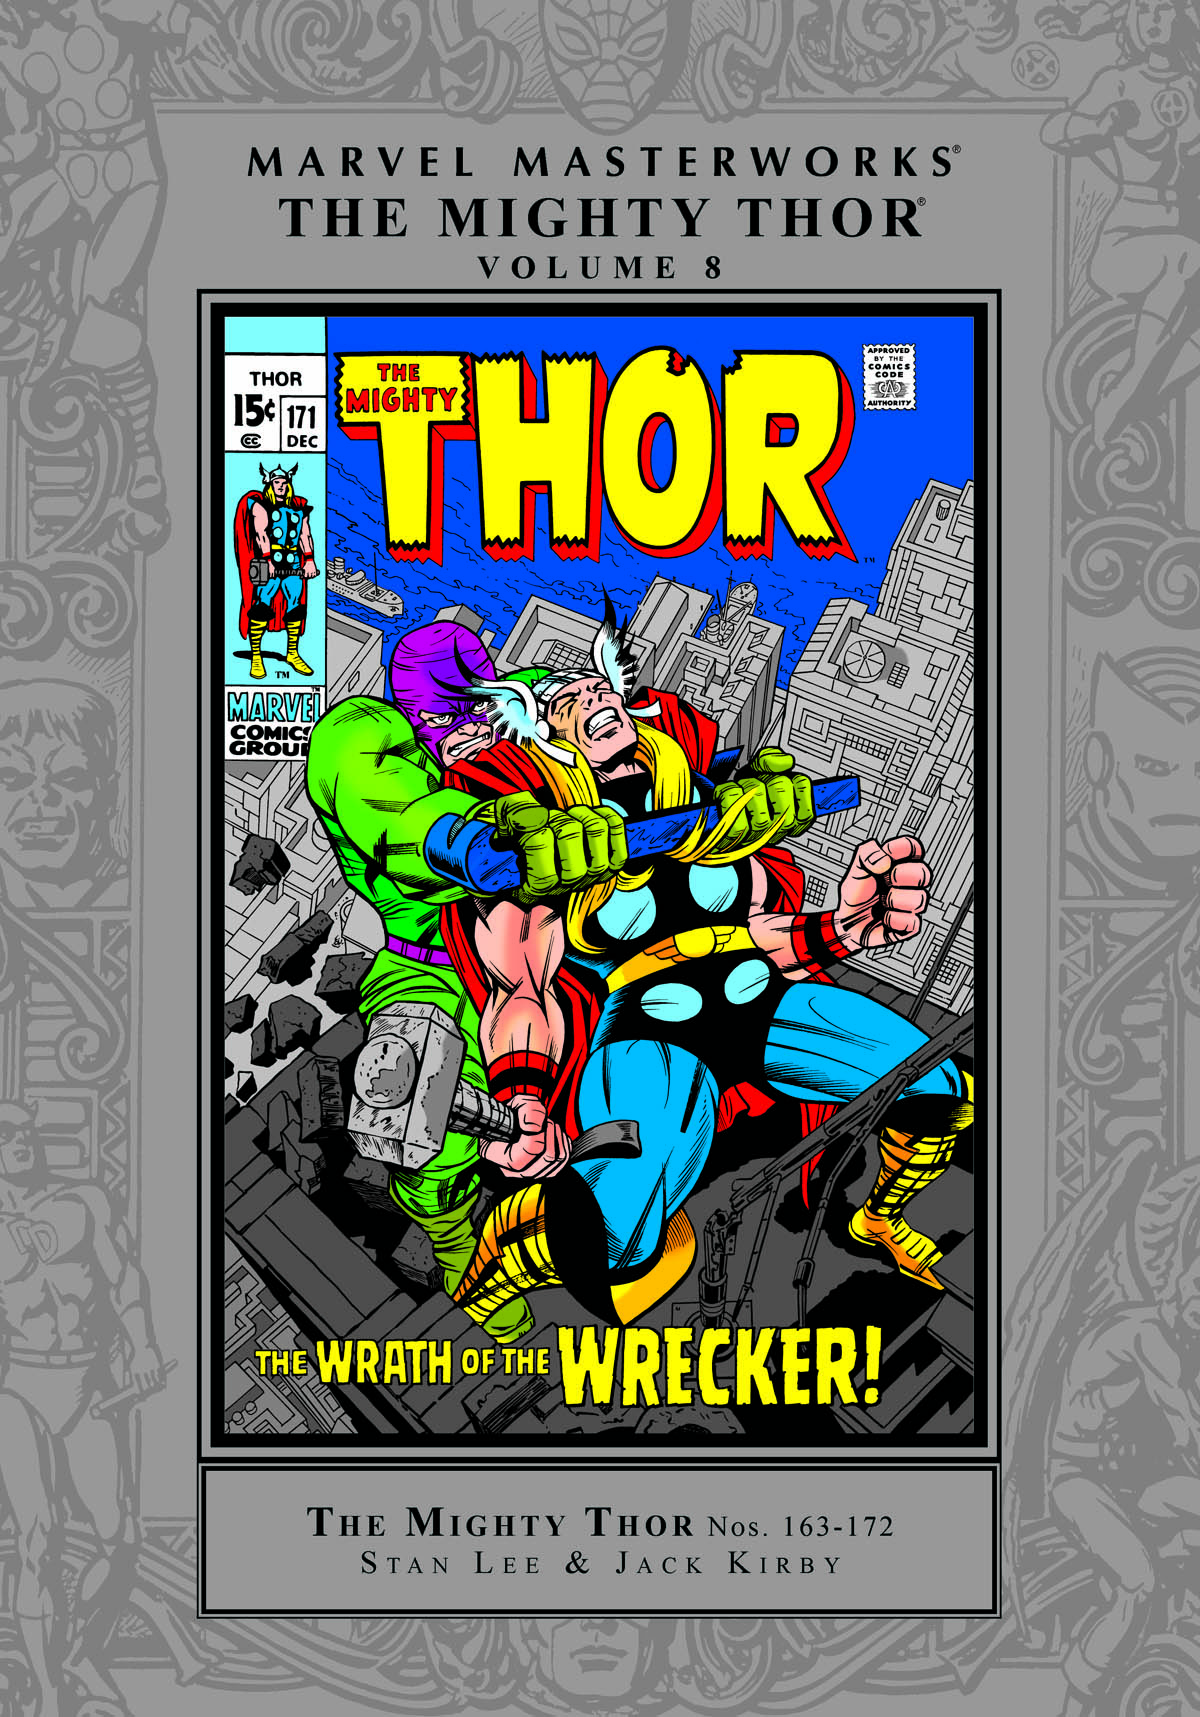 Marvel Masterworks: The Mighty Thor Vol. 7 (Trade Paperback)